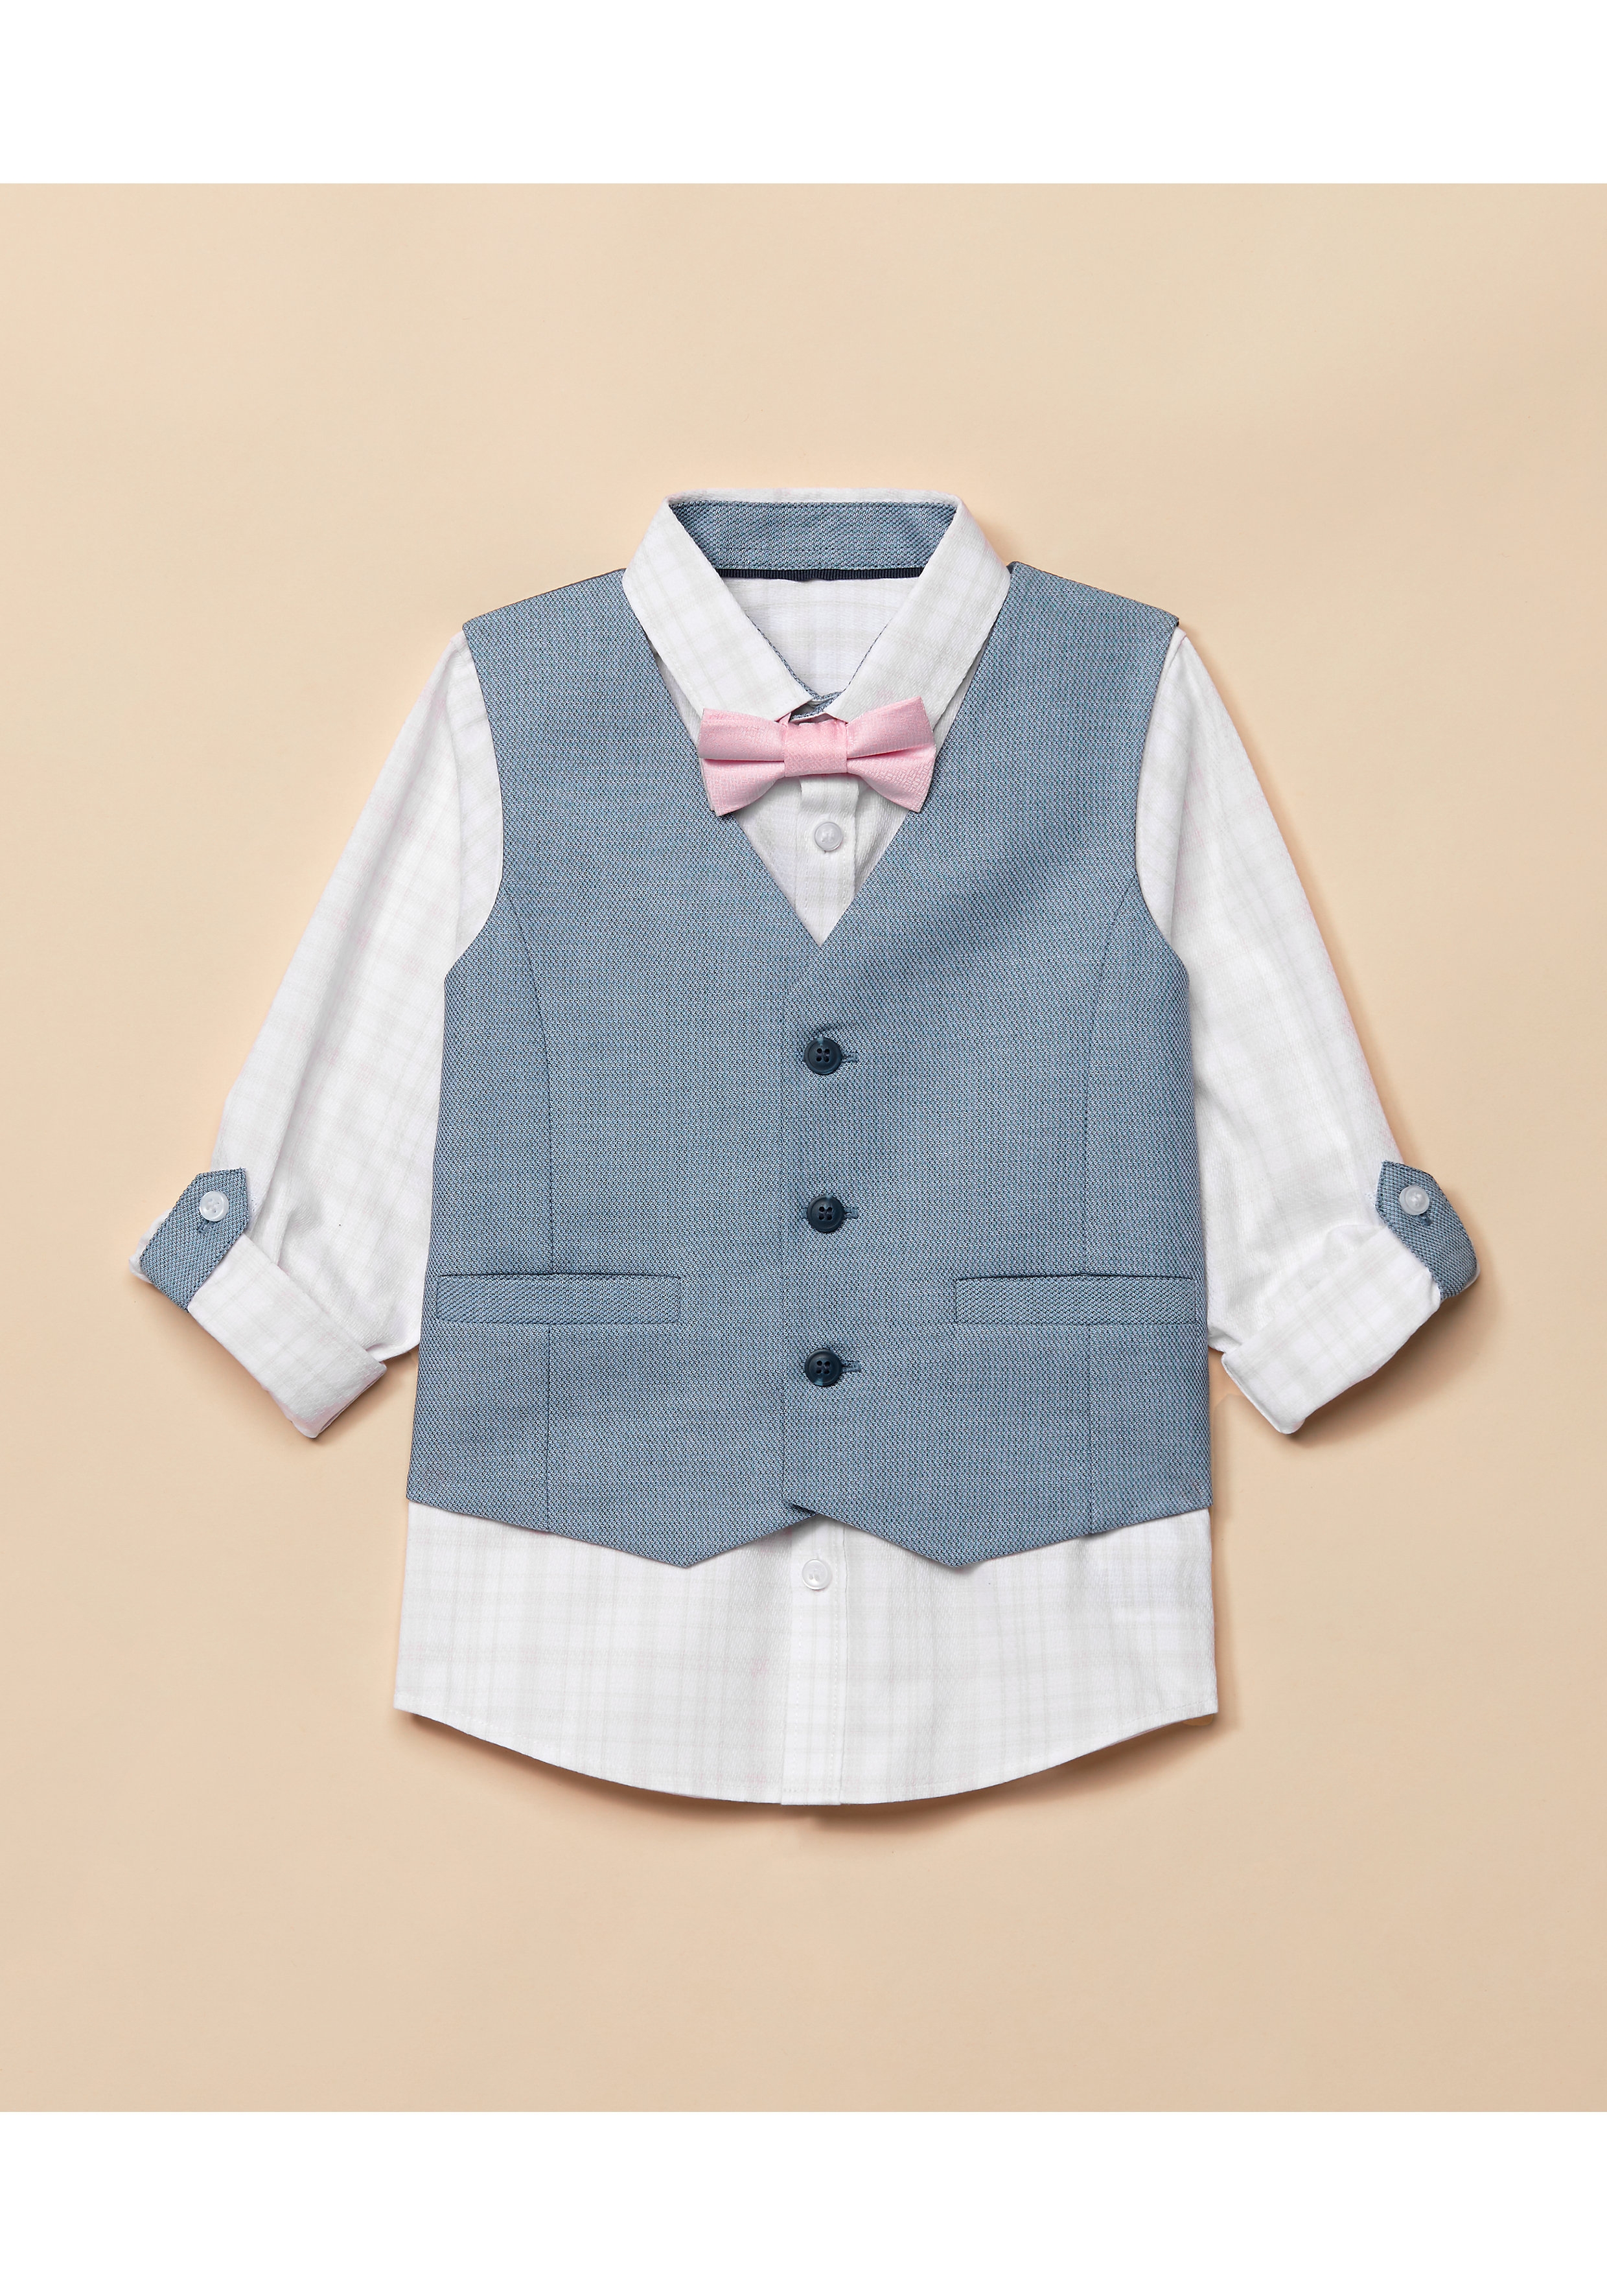 Mothercare | Boys Full Sleeves Shirt With Waistcoat - White Blue 0